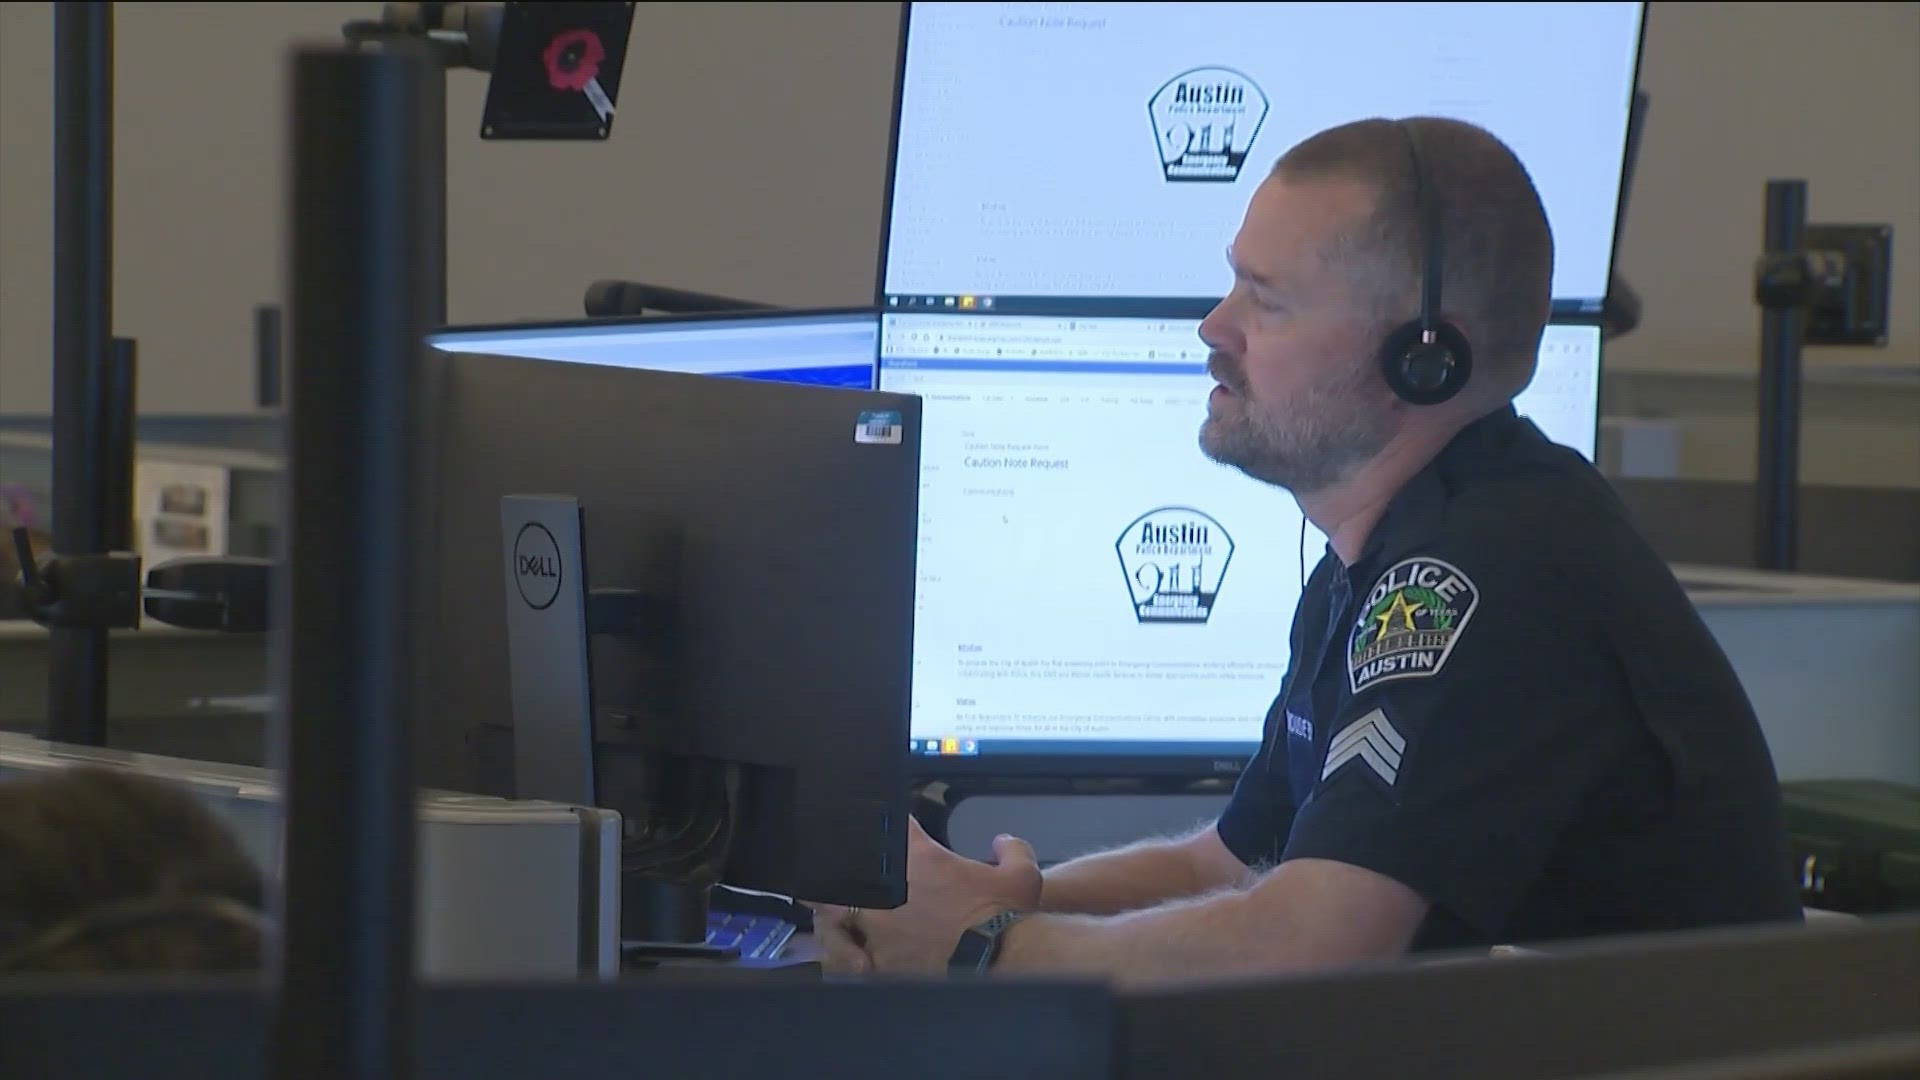 Since November, APD has been facing a shortage of 911 call takers. Now, sergeants are filling in overtime shifts to make sure the calls get taken.